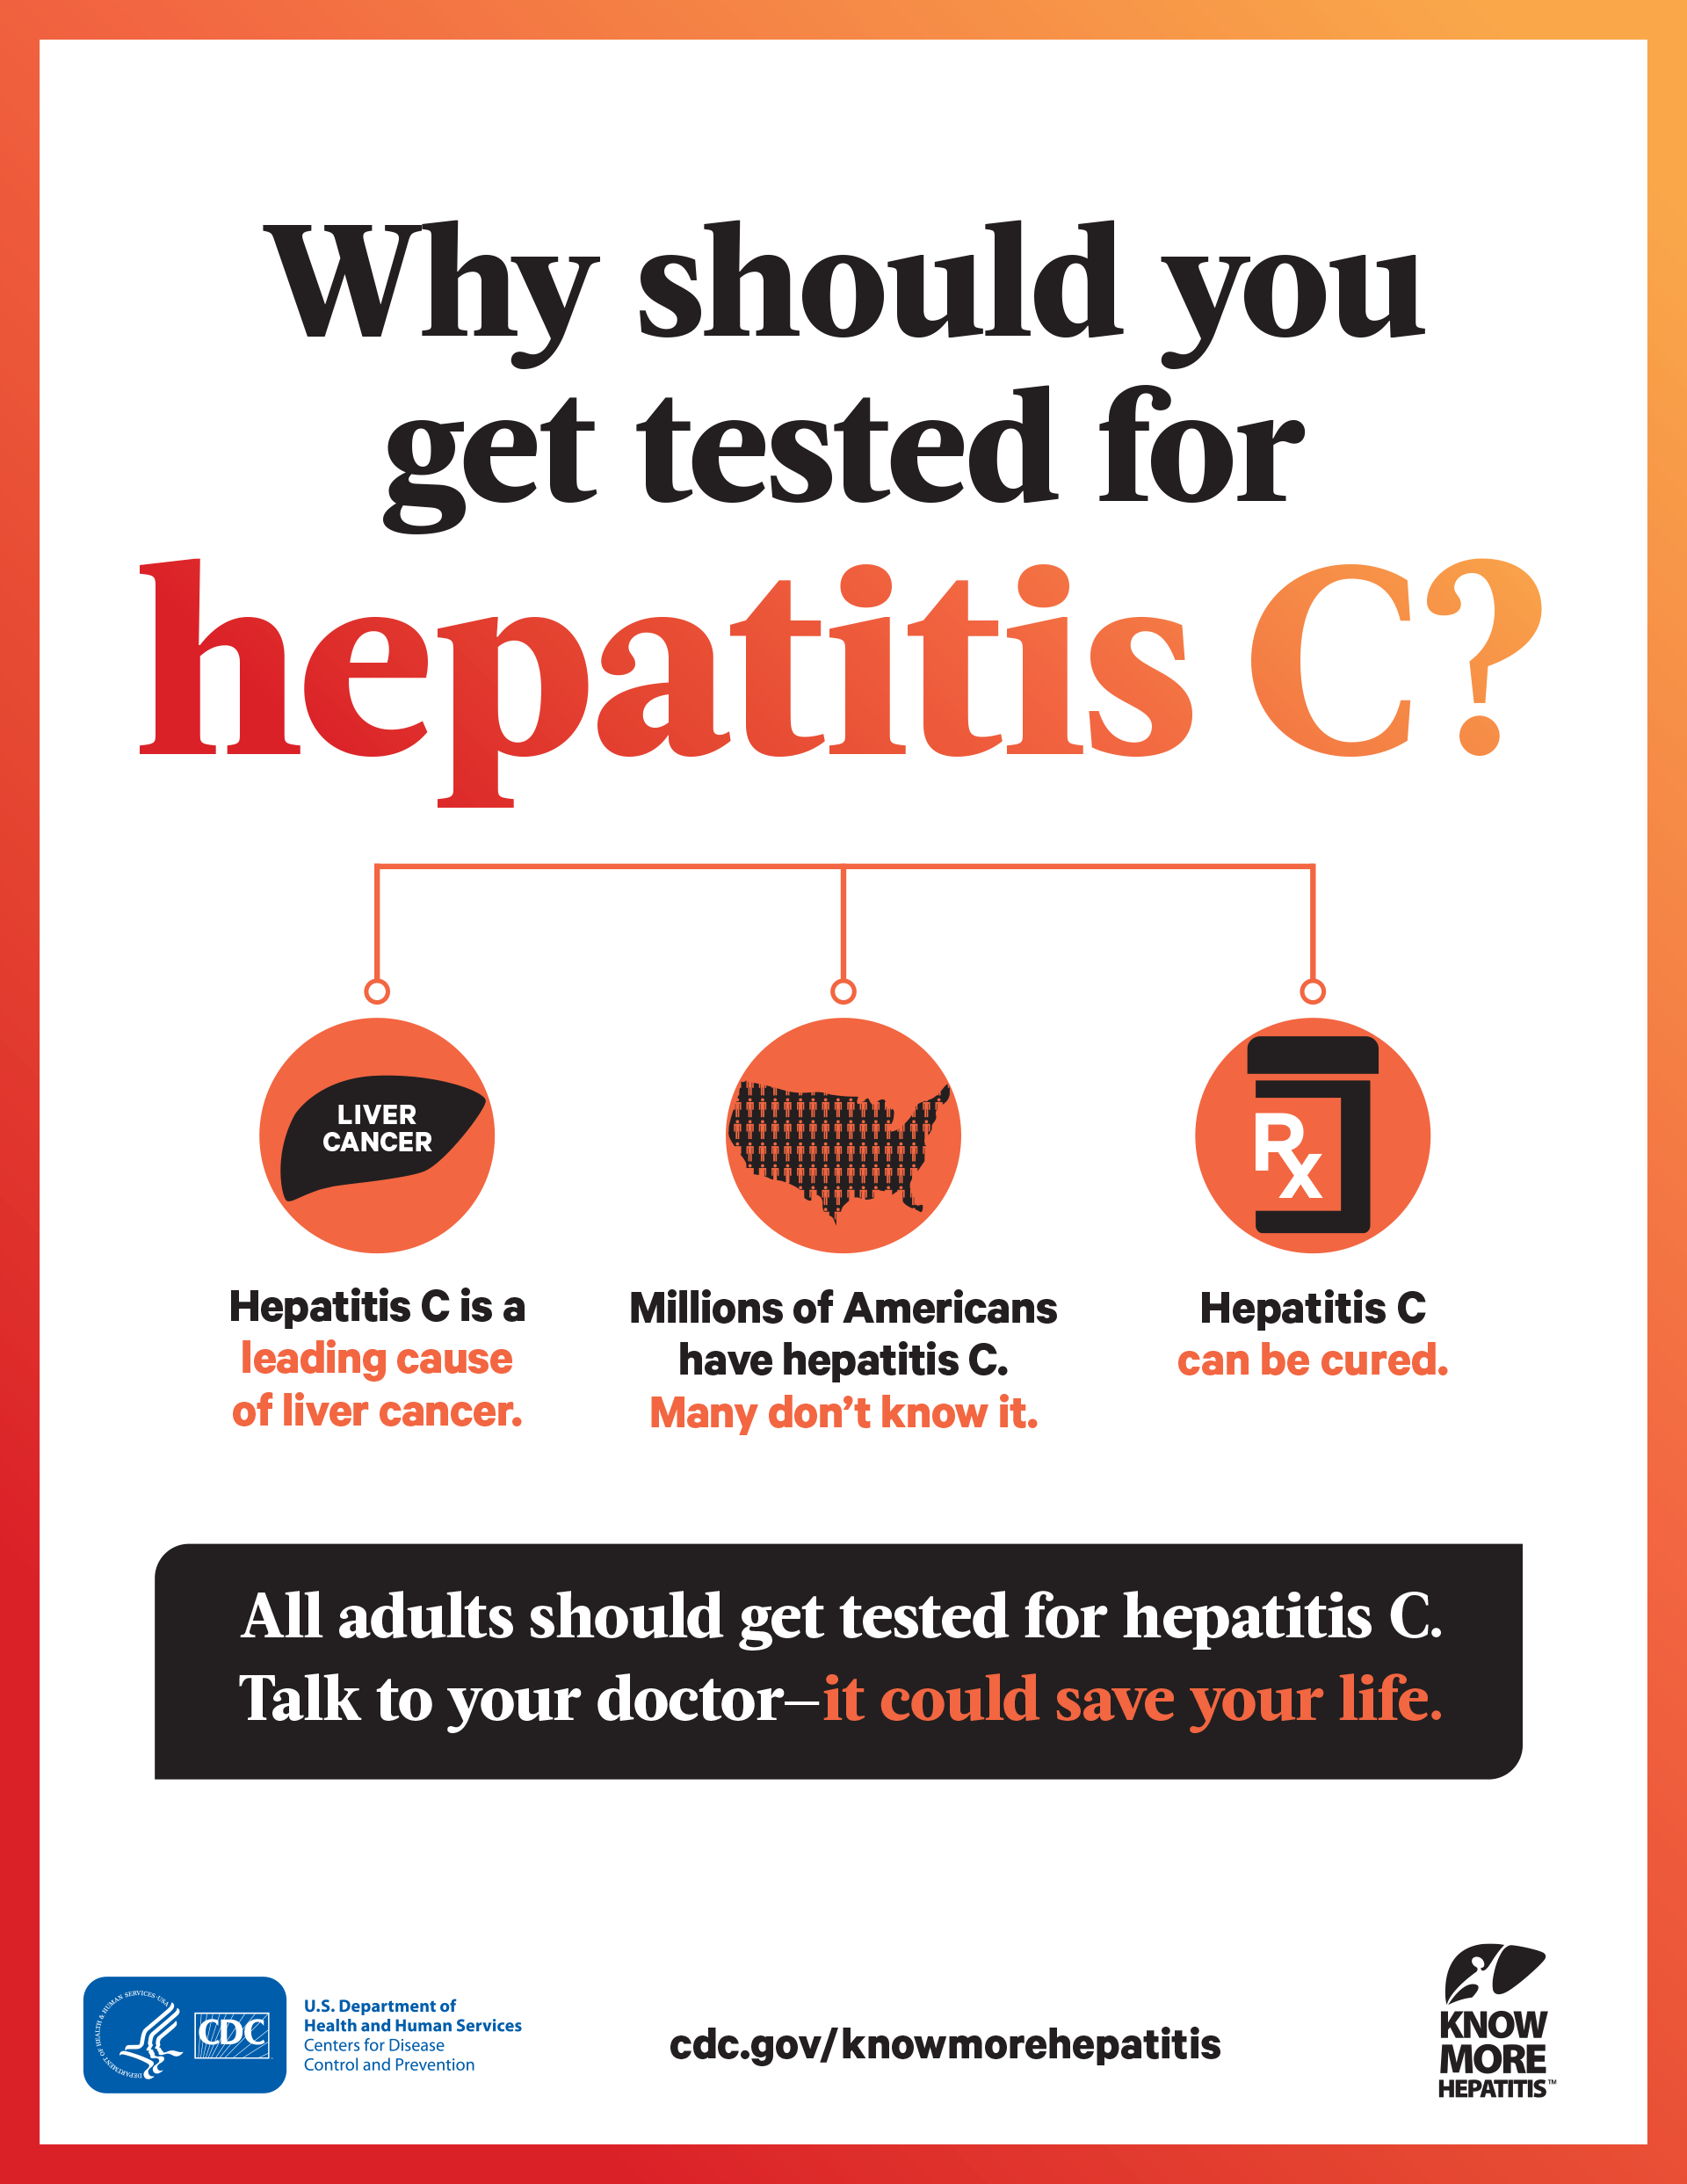 All adults should get tested for hepatitis C. Talk to your doctor - it could save your life.